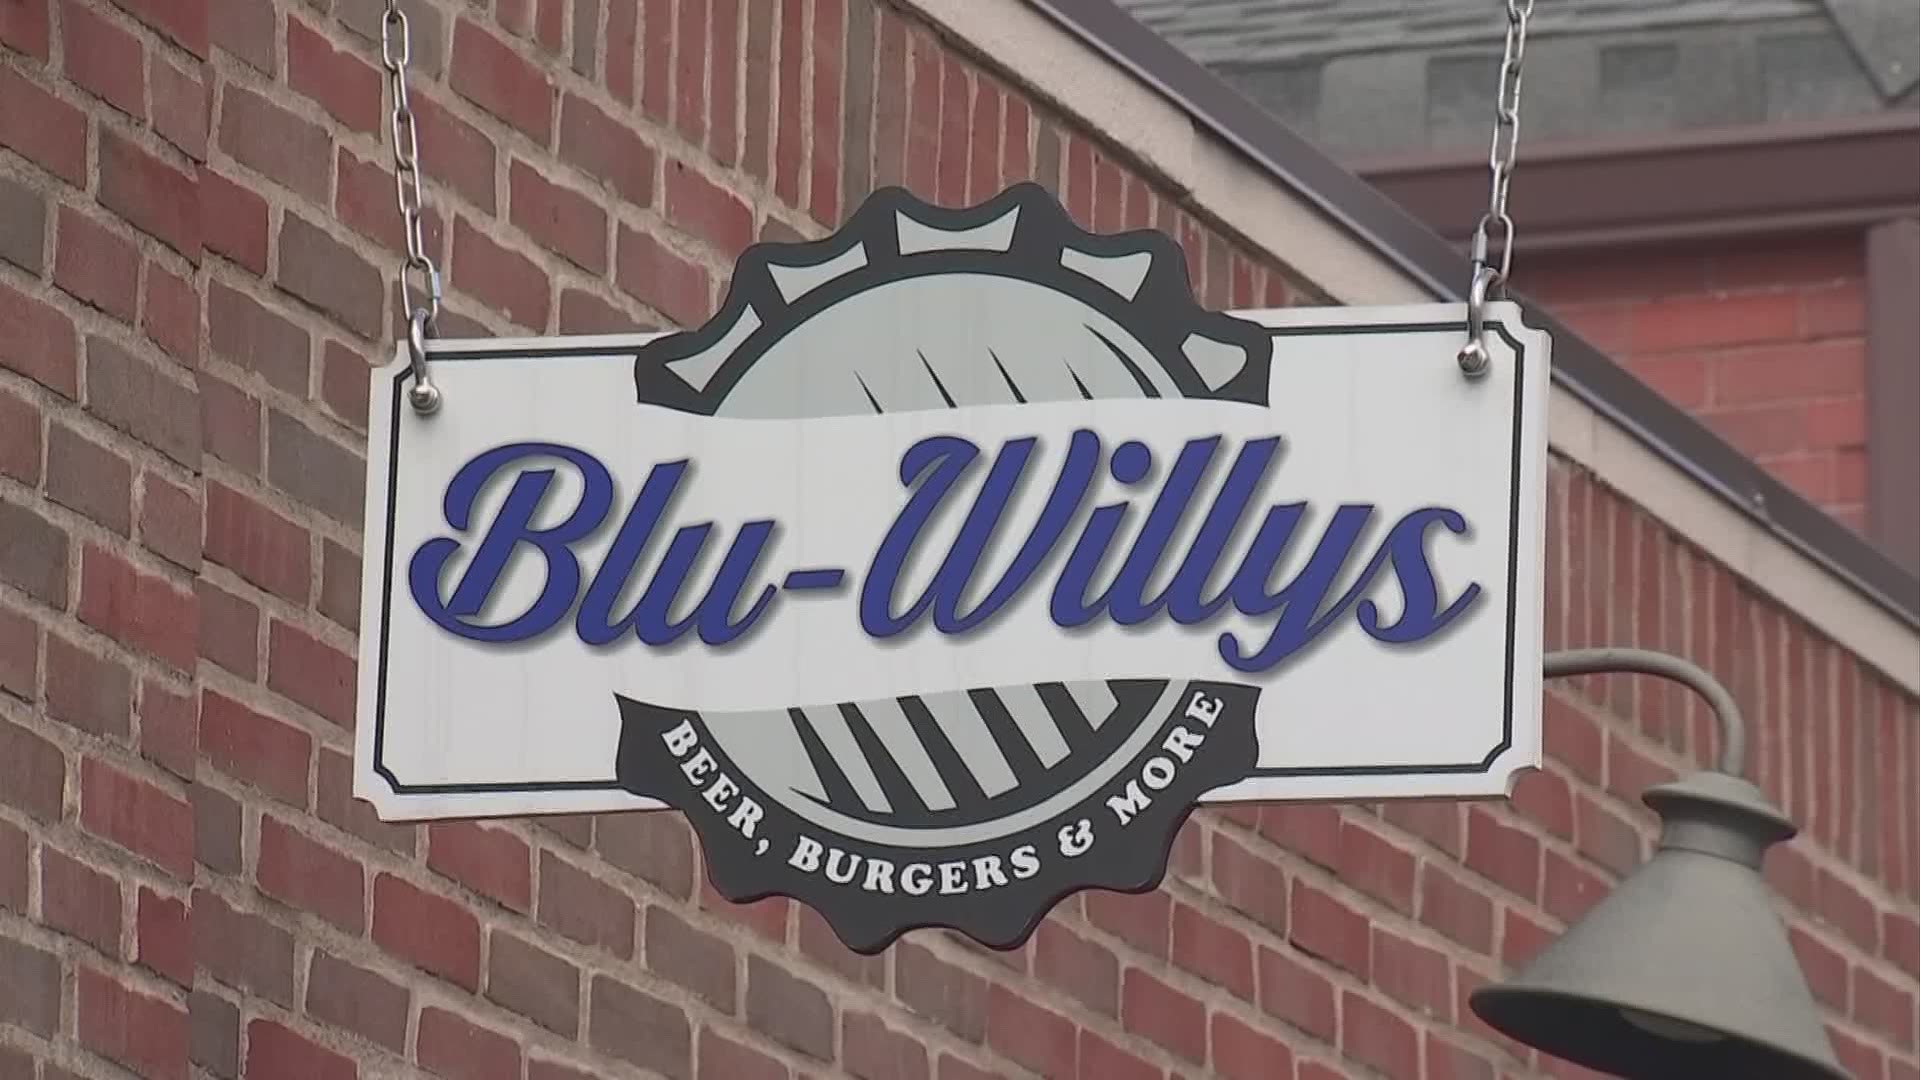 Blu Willys is back open after a fire devastated their Grove City restaurant.